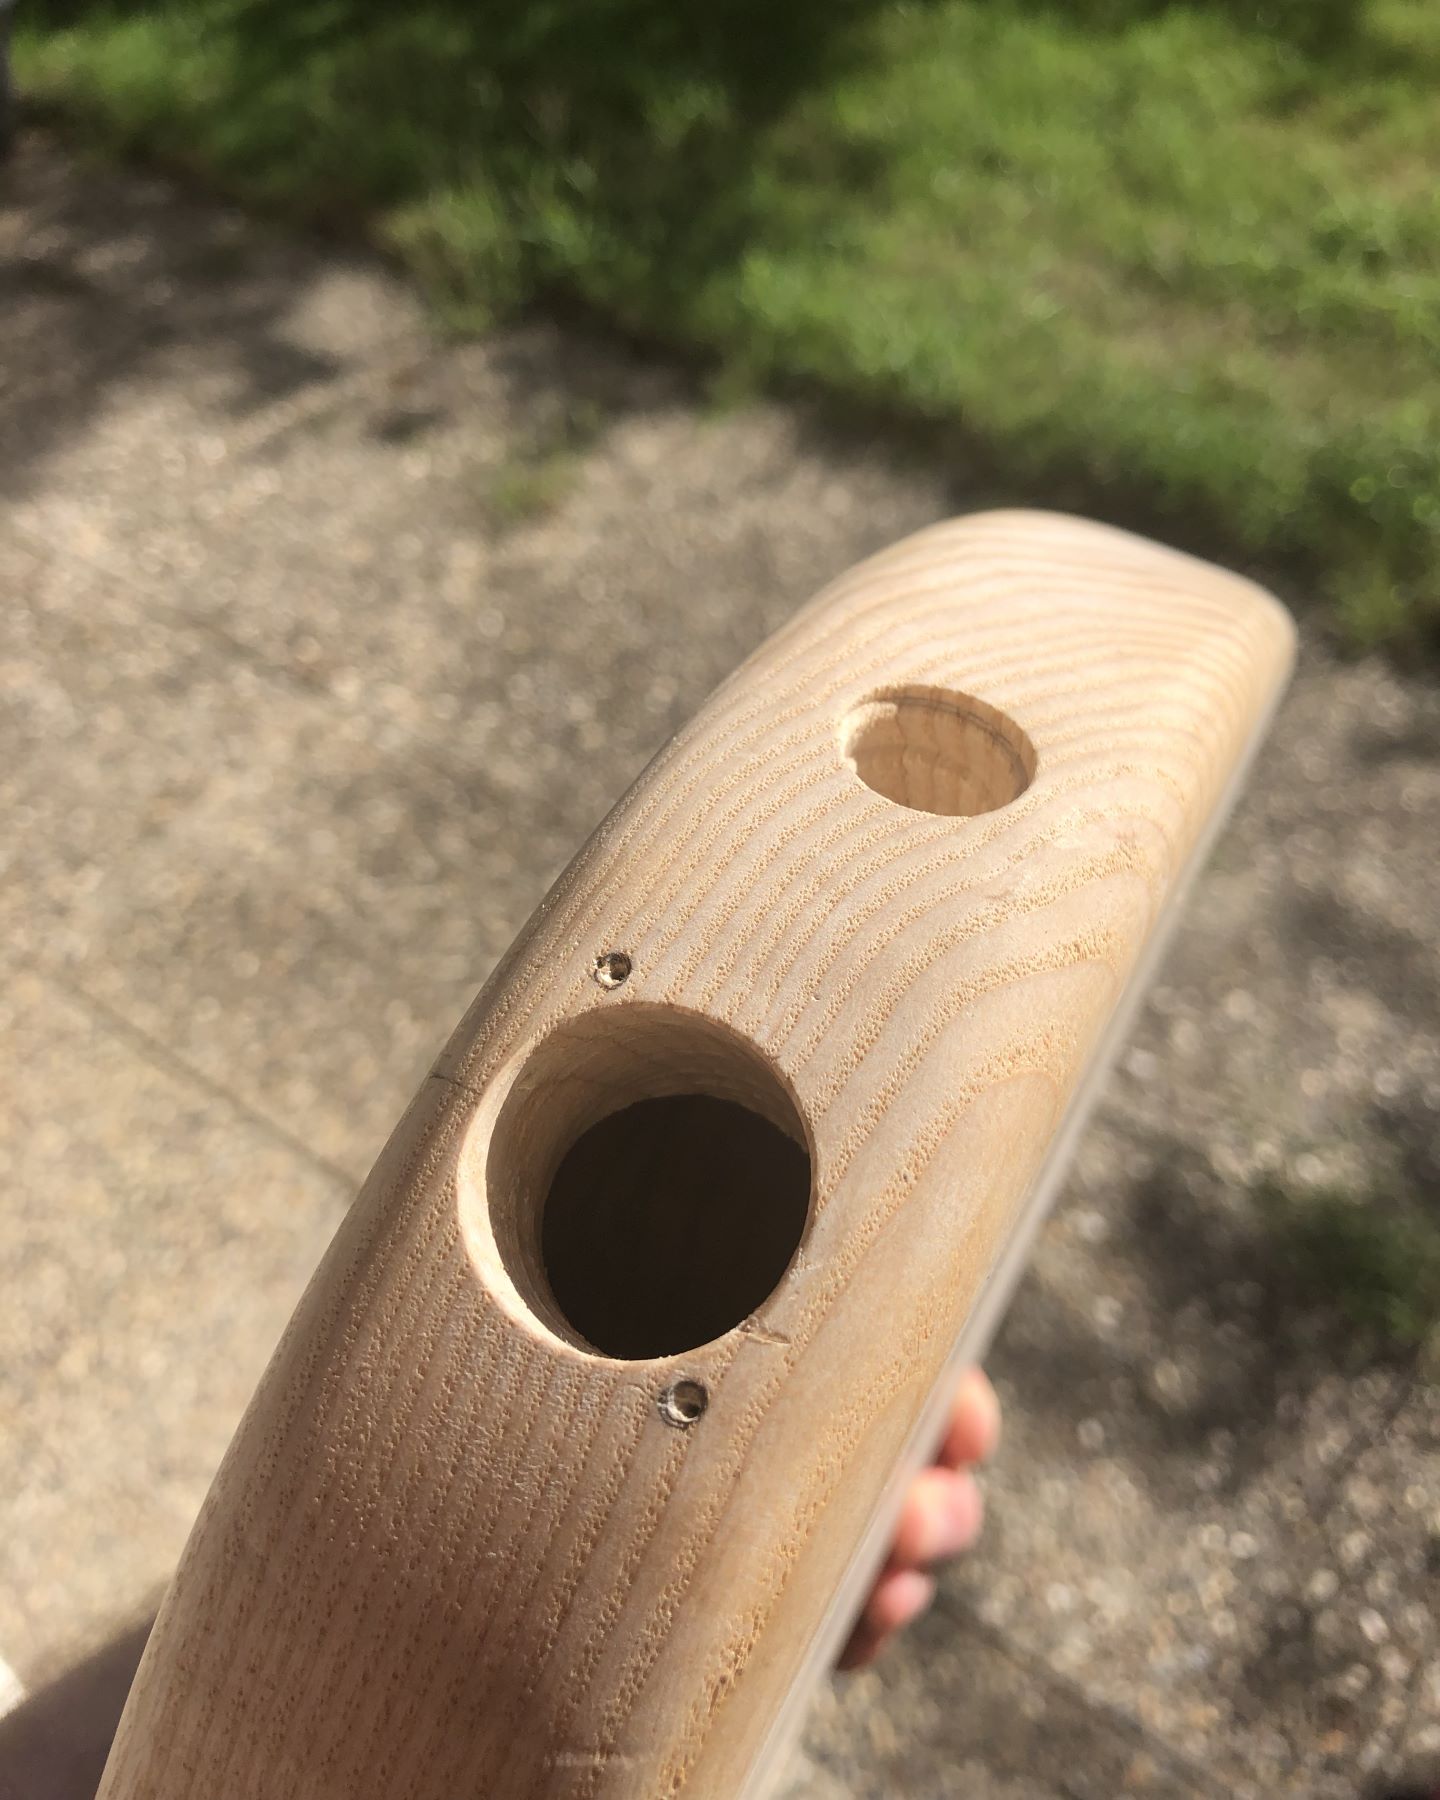 Side view photo of the bass guitar body with a large 24 mm hole centered on the side of the body with two much smaller holes less than 3 mm from the large hole. A smaller hole for a regular deep panel jack is visible as well.